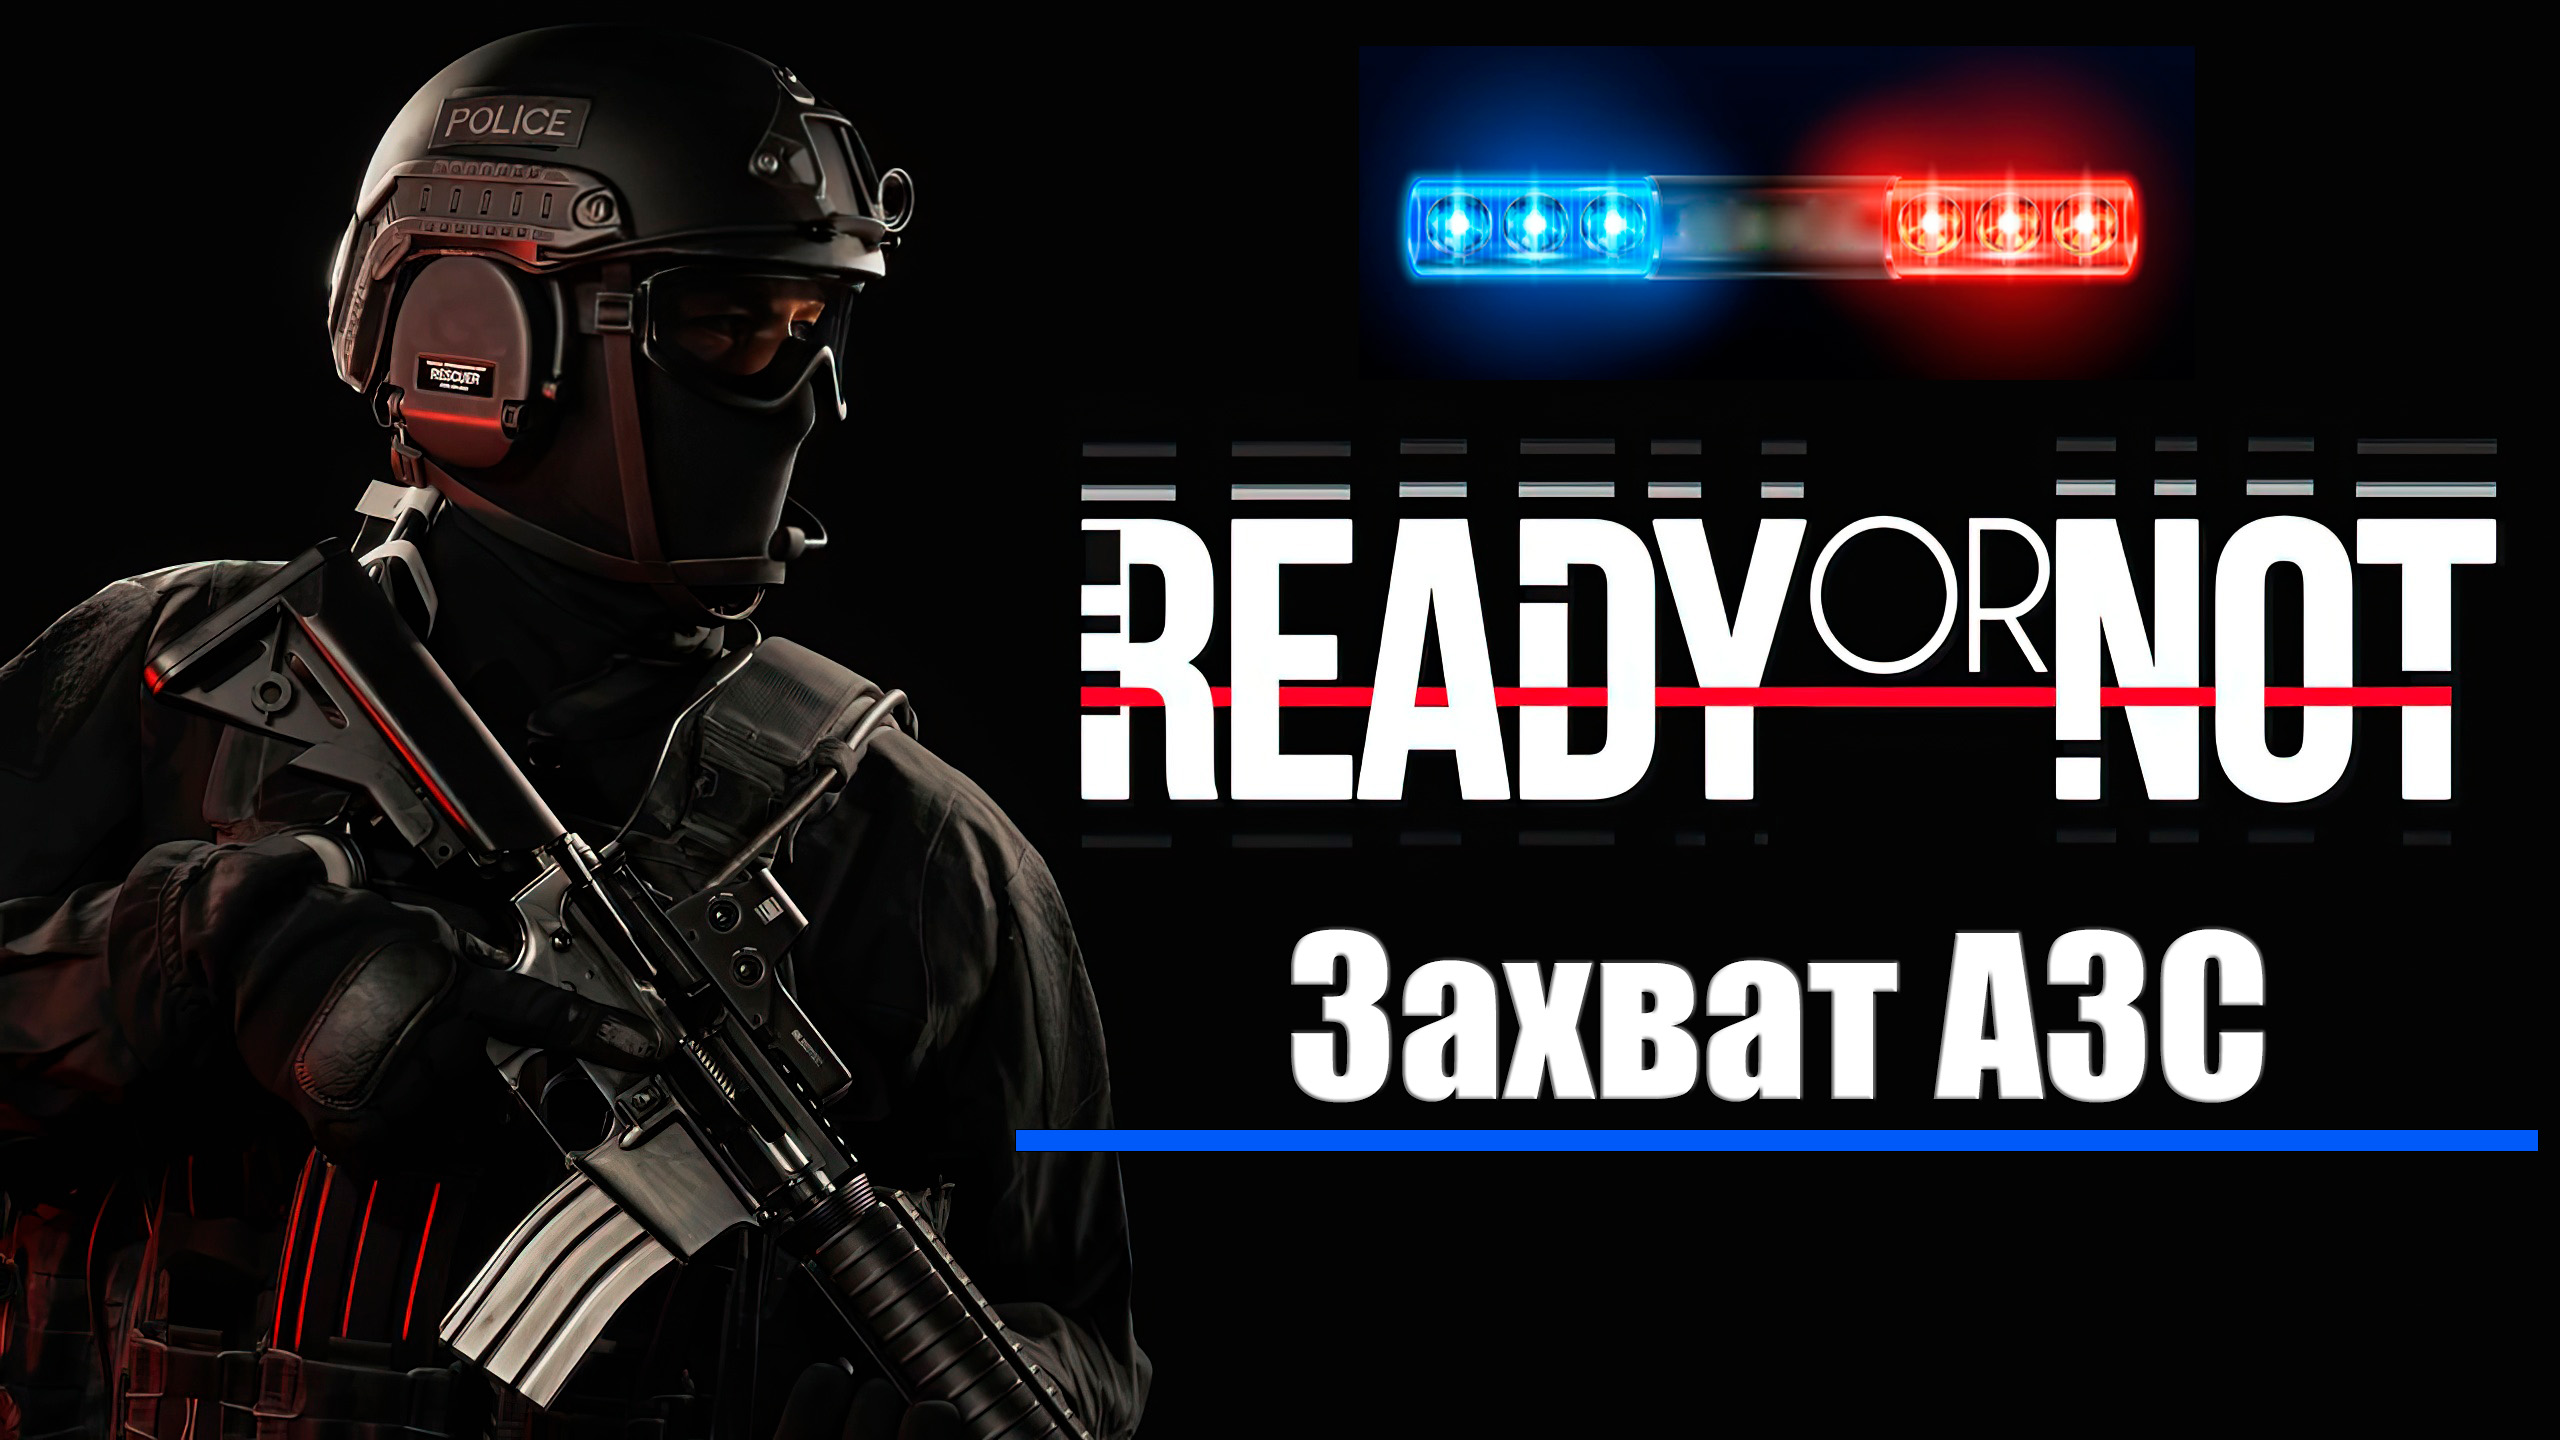 Ready or not игра. SWAT 4 АЗС. Обои еа телефон Redi or not. Ready or not карты